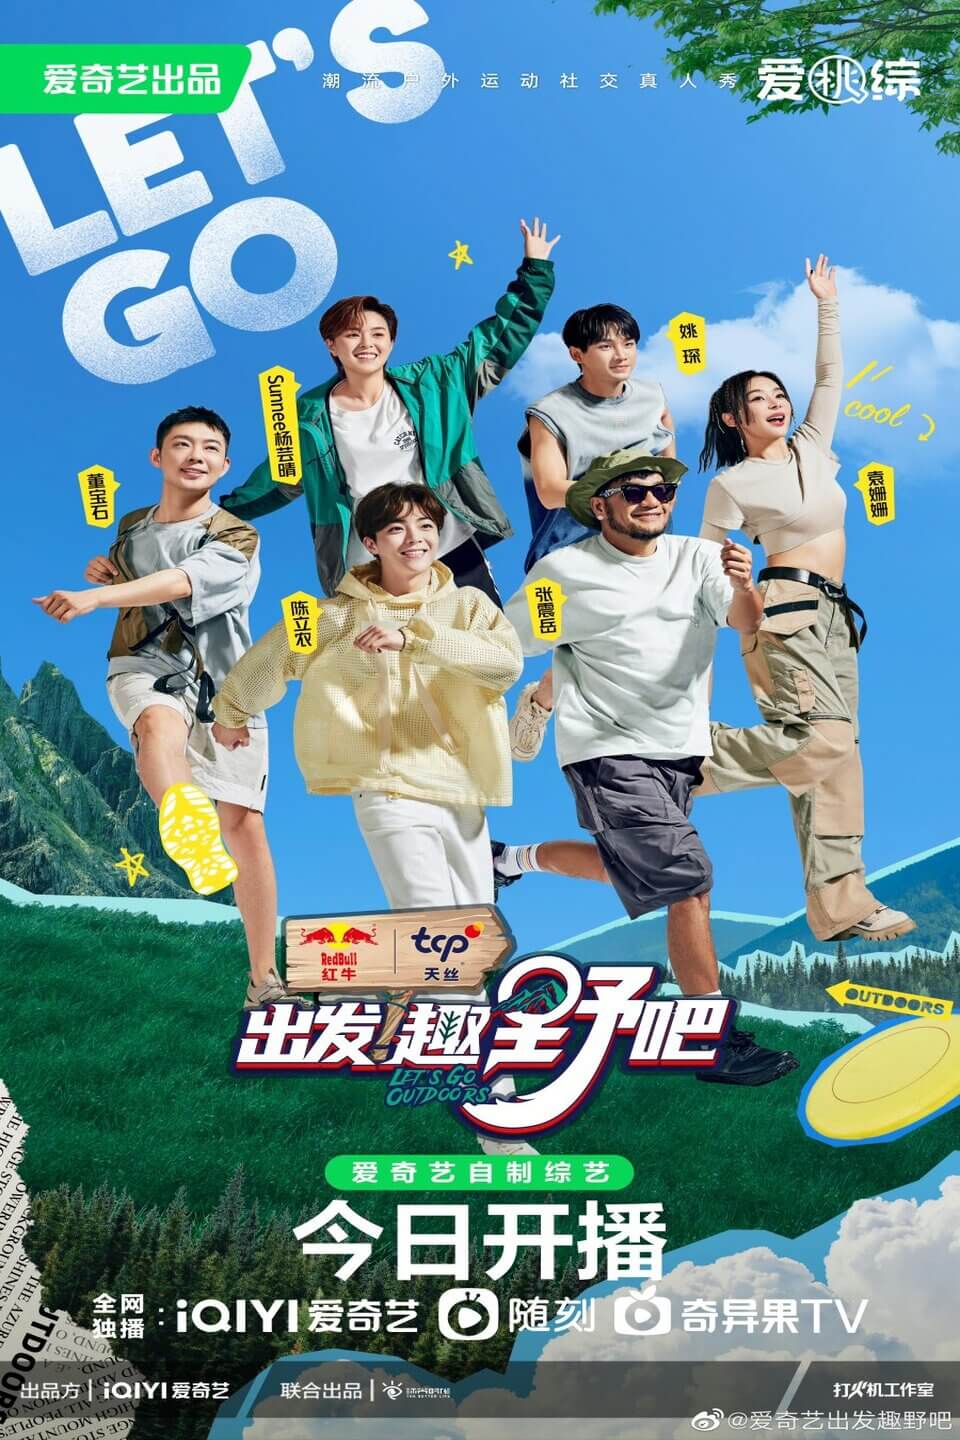 TV ratings for Let's Go Outdoors (出发！趣野吧) in Portugal. iqiyi TV series